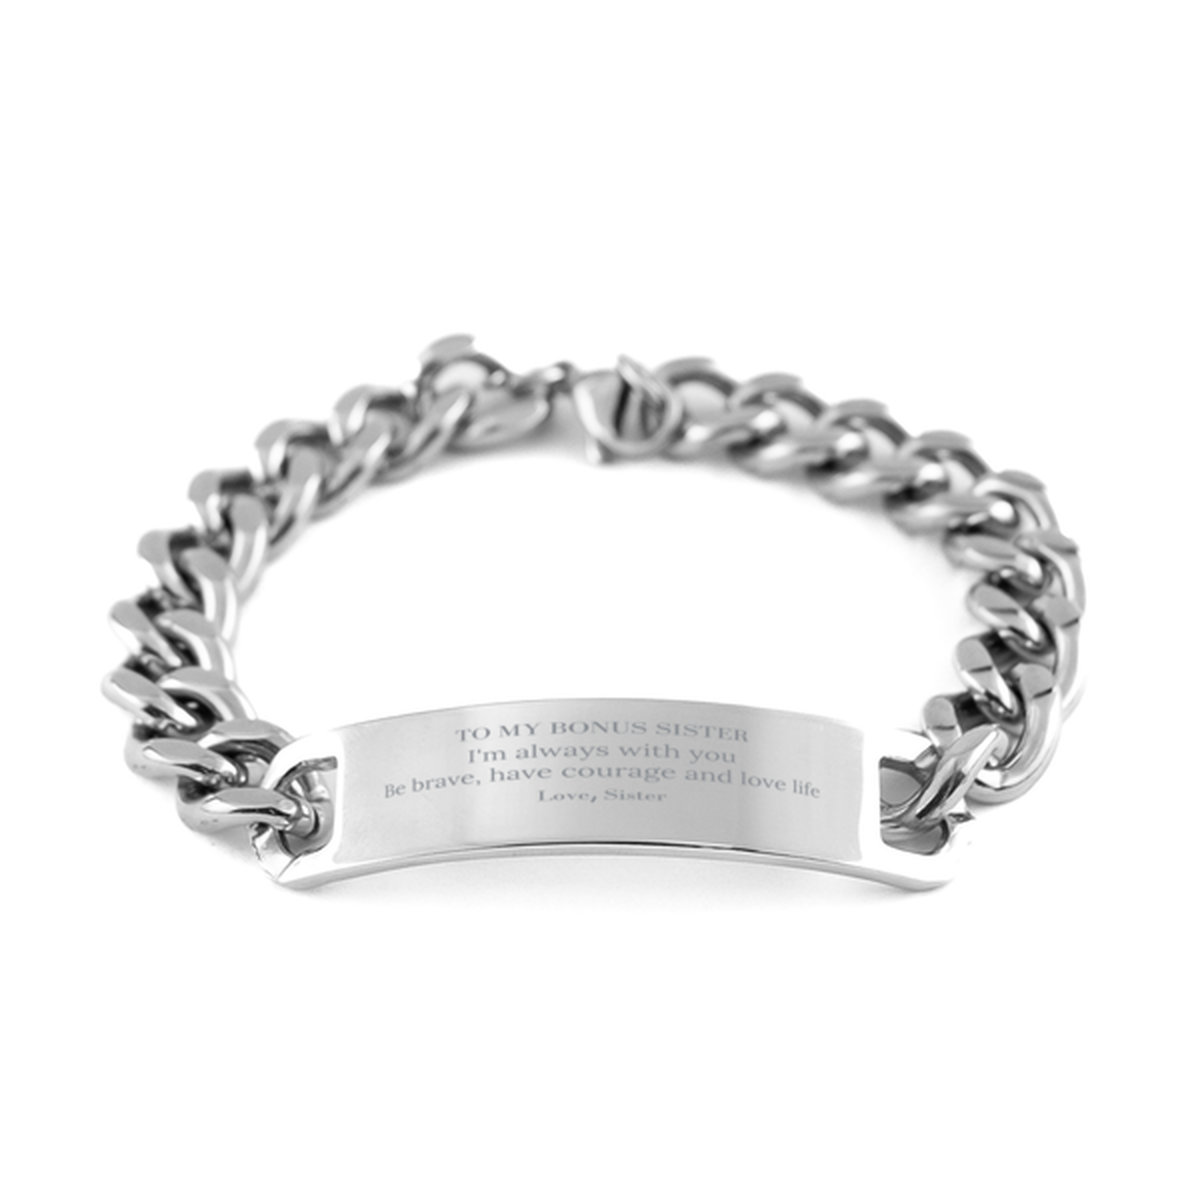 To My Bonus Sister Gifts from Sister, Unique Cuban Chain Stainless Steel Bracelet Inspirational Christmas Birthday Graduation Gifts for Bonus Sister I'm always with you. Be brave, have courage and love life. Love, Sister